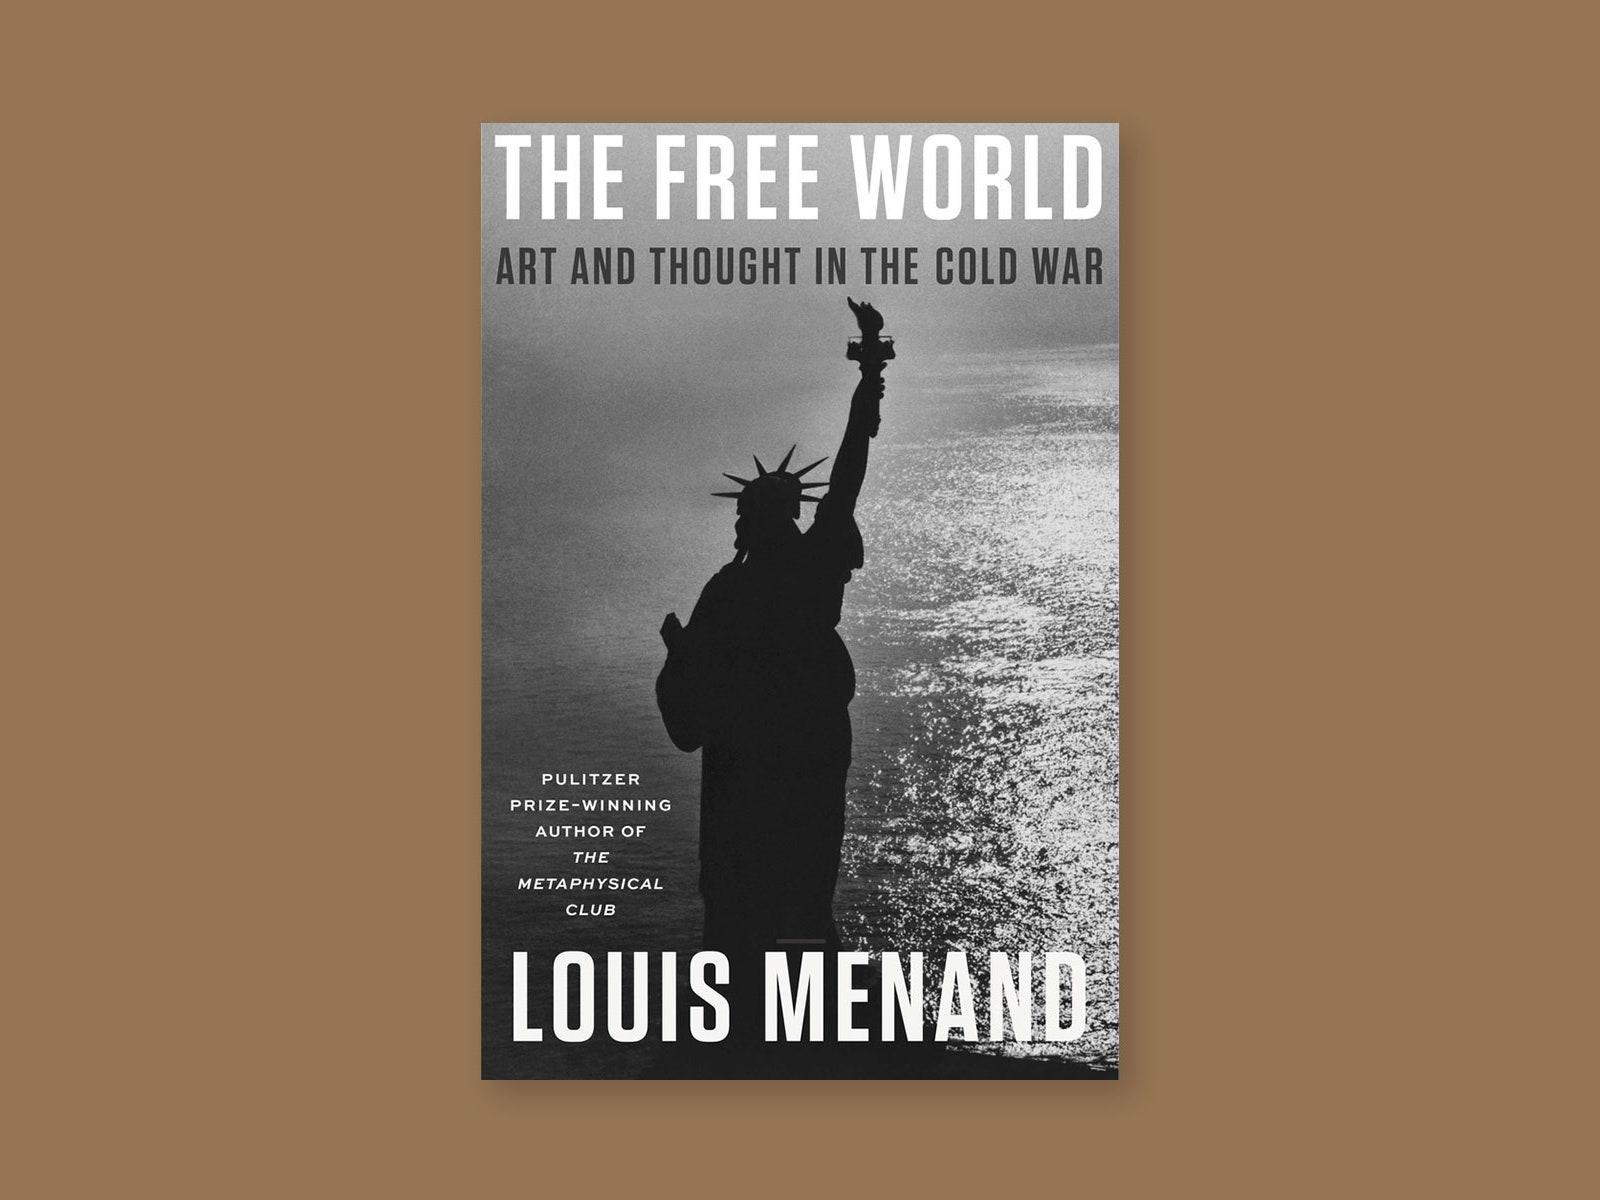 Louis Menand on “The Free World”, The Political Scene, The New Yorker